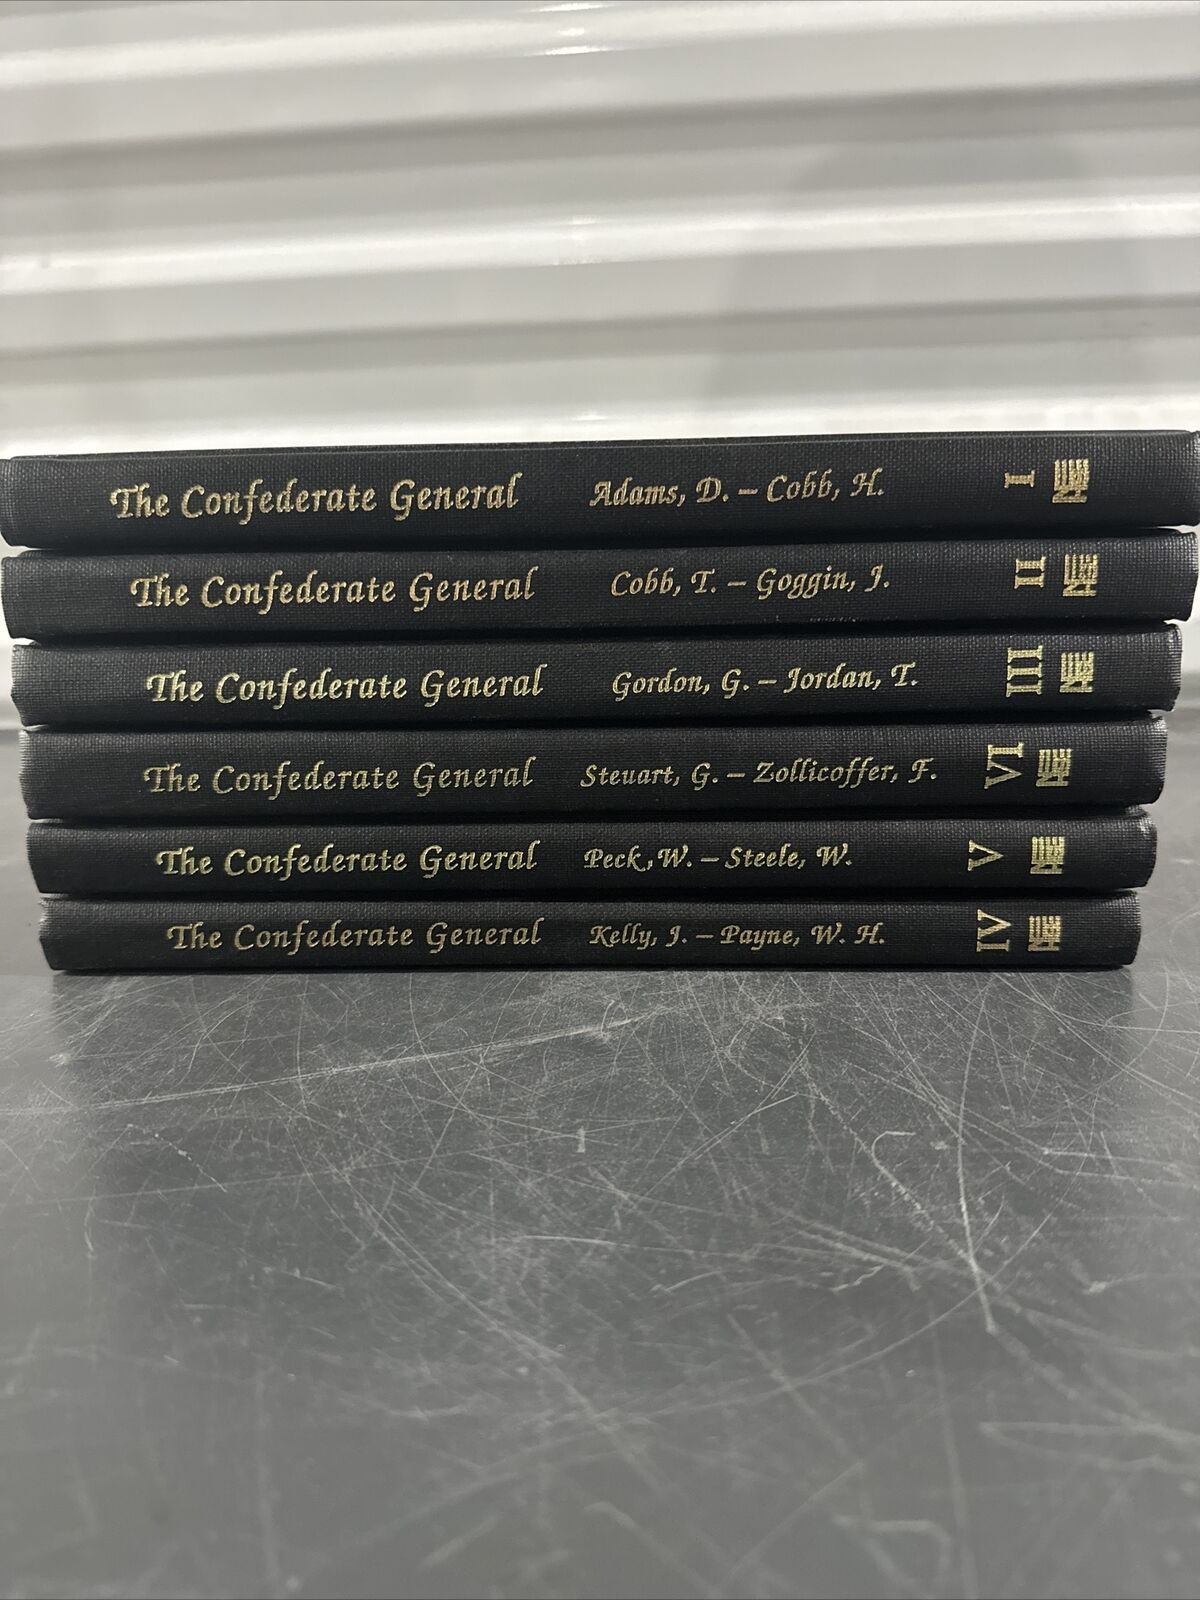 The Confederate General Complete 6 Volume Hardcover set